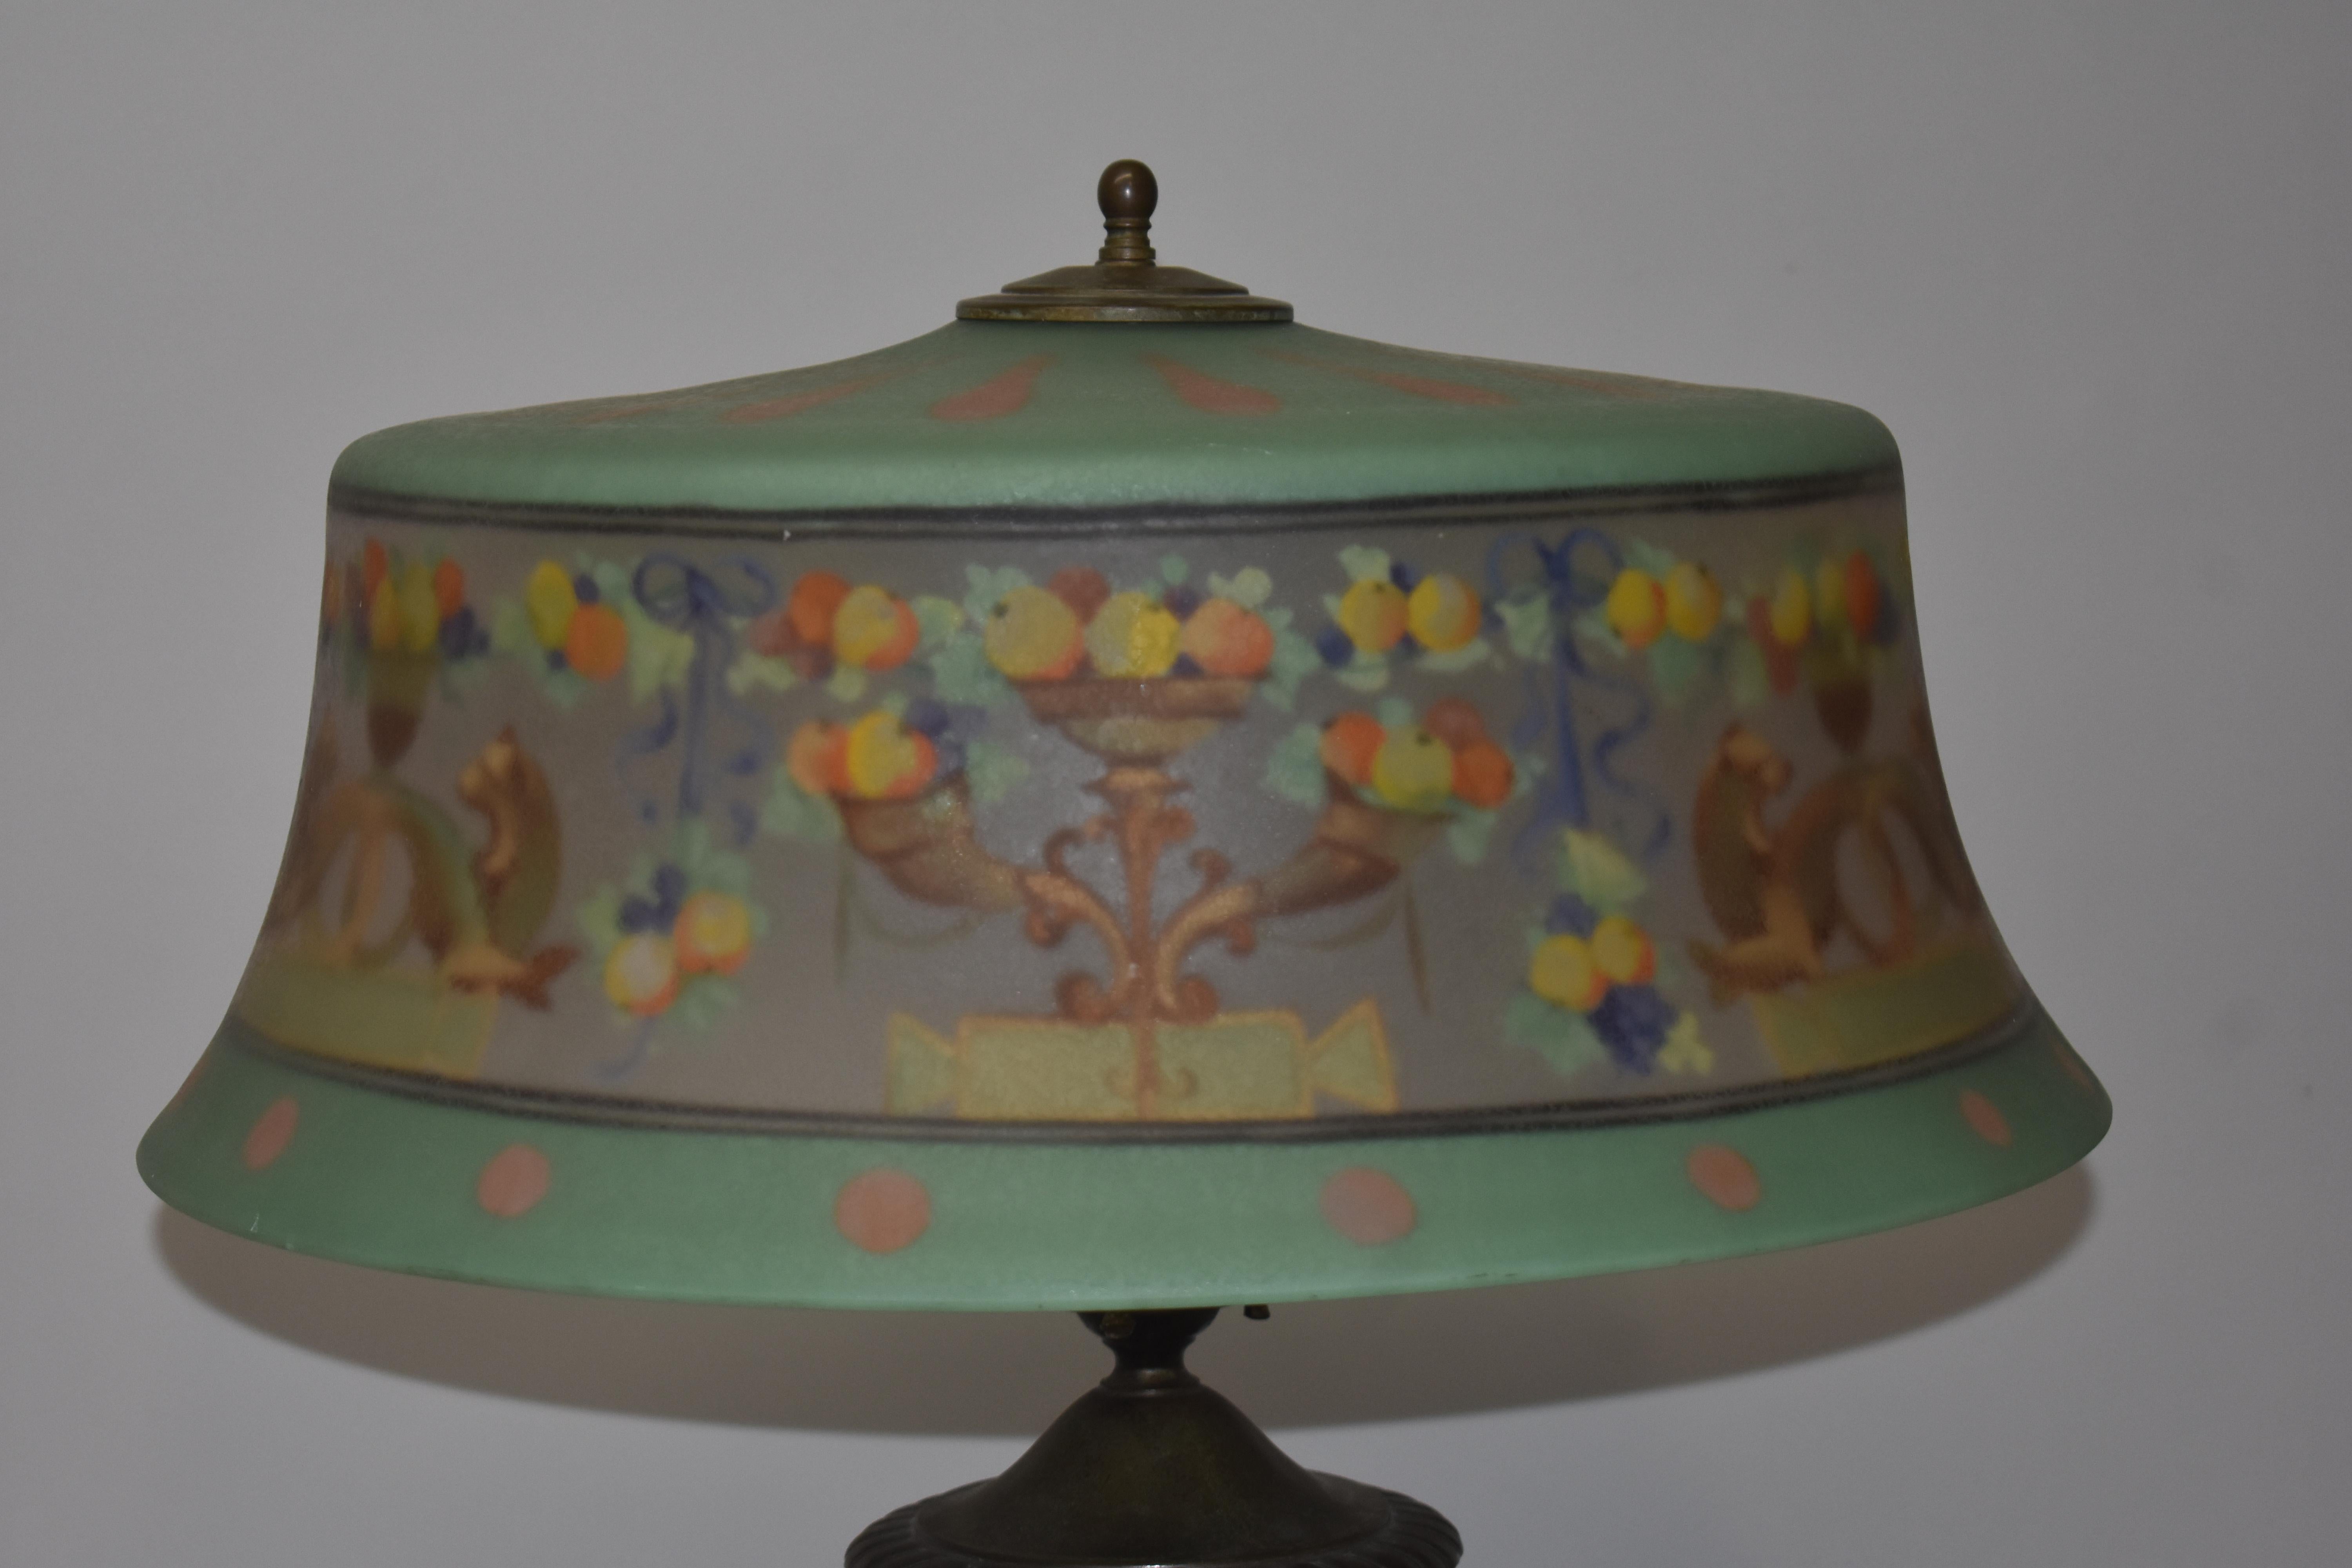 Art Nouveau Pairpoint Reverse Painted Table Lamp Exeter Shade #X27 Base 3042 Dragon & Fruit